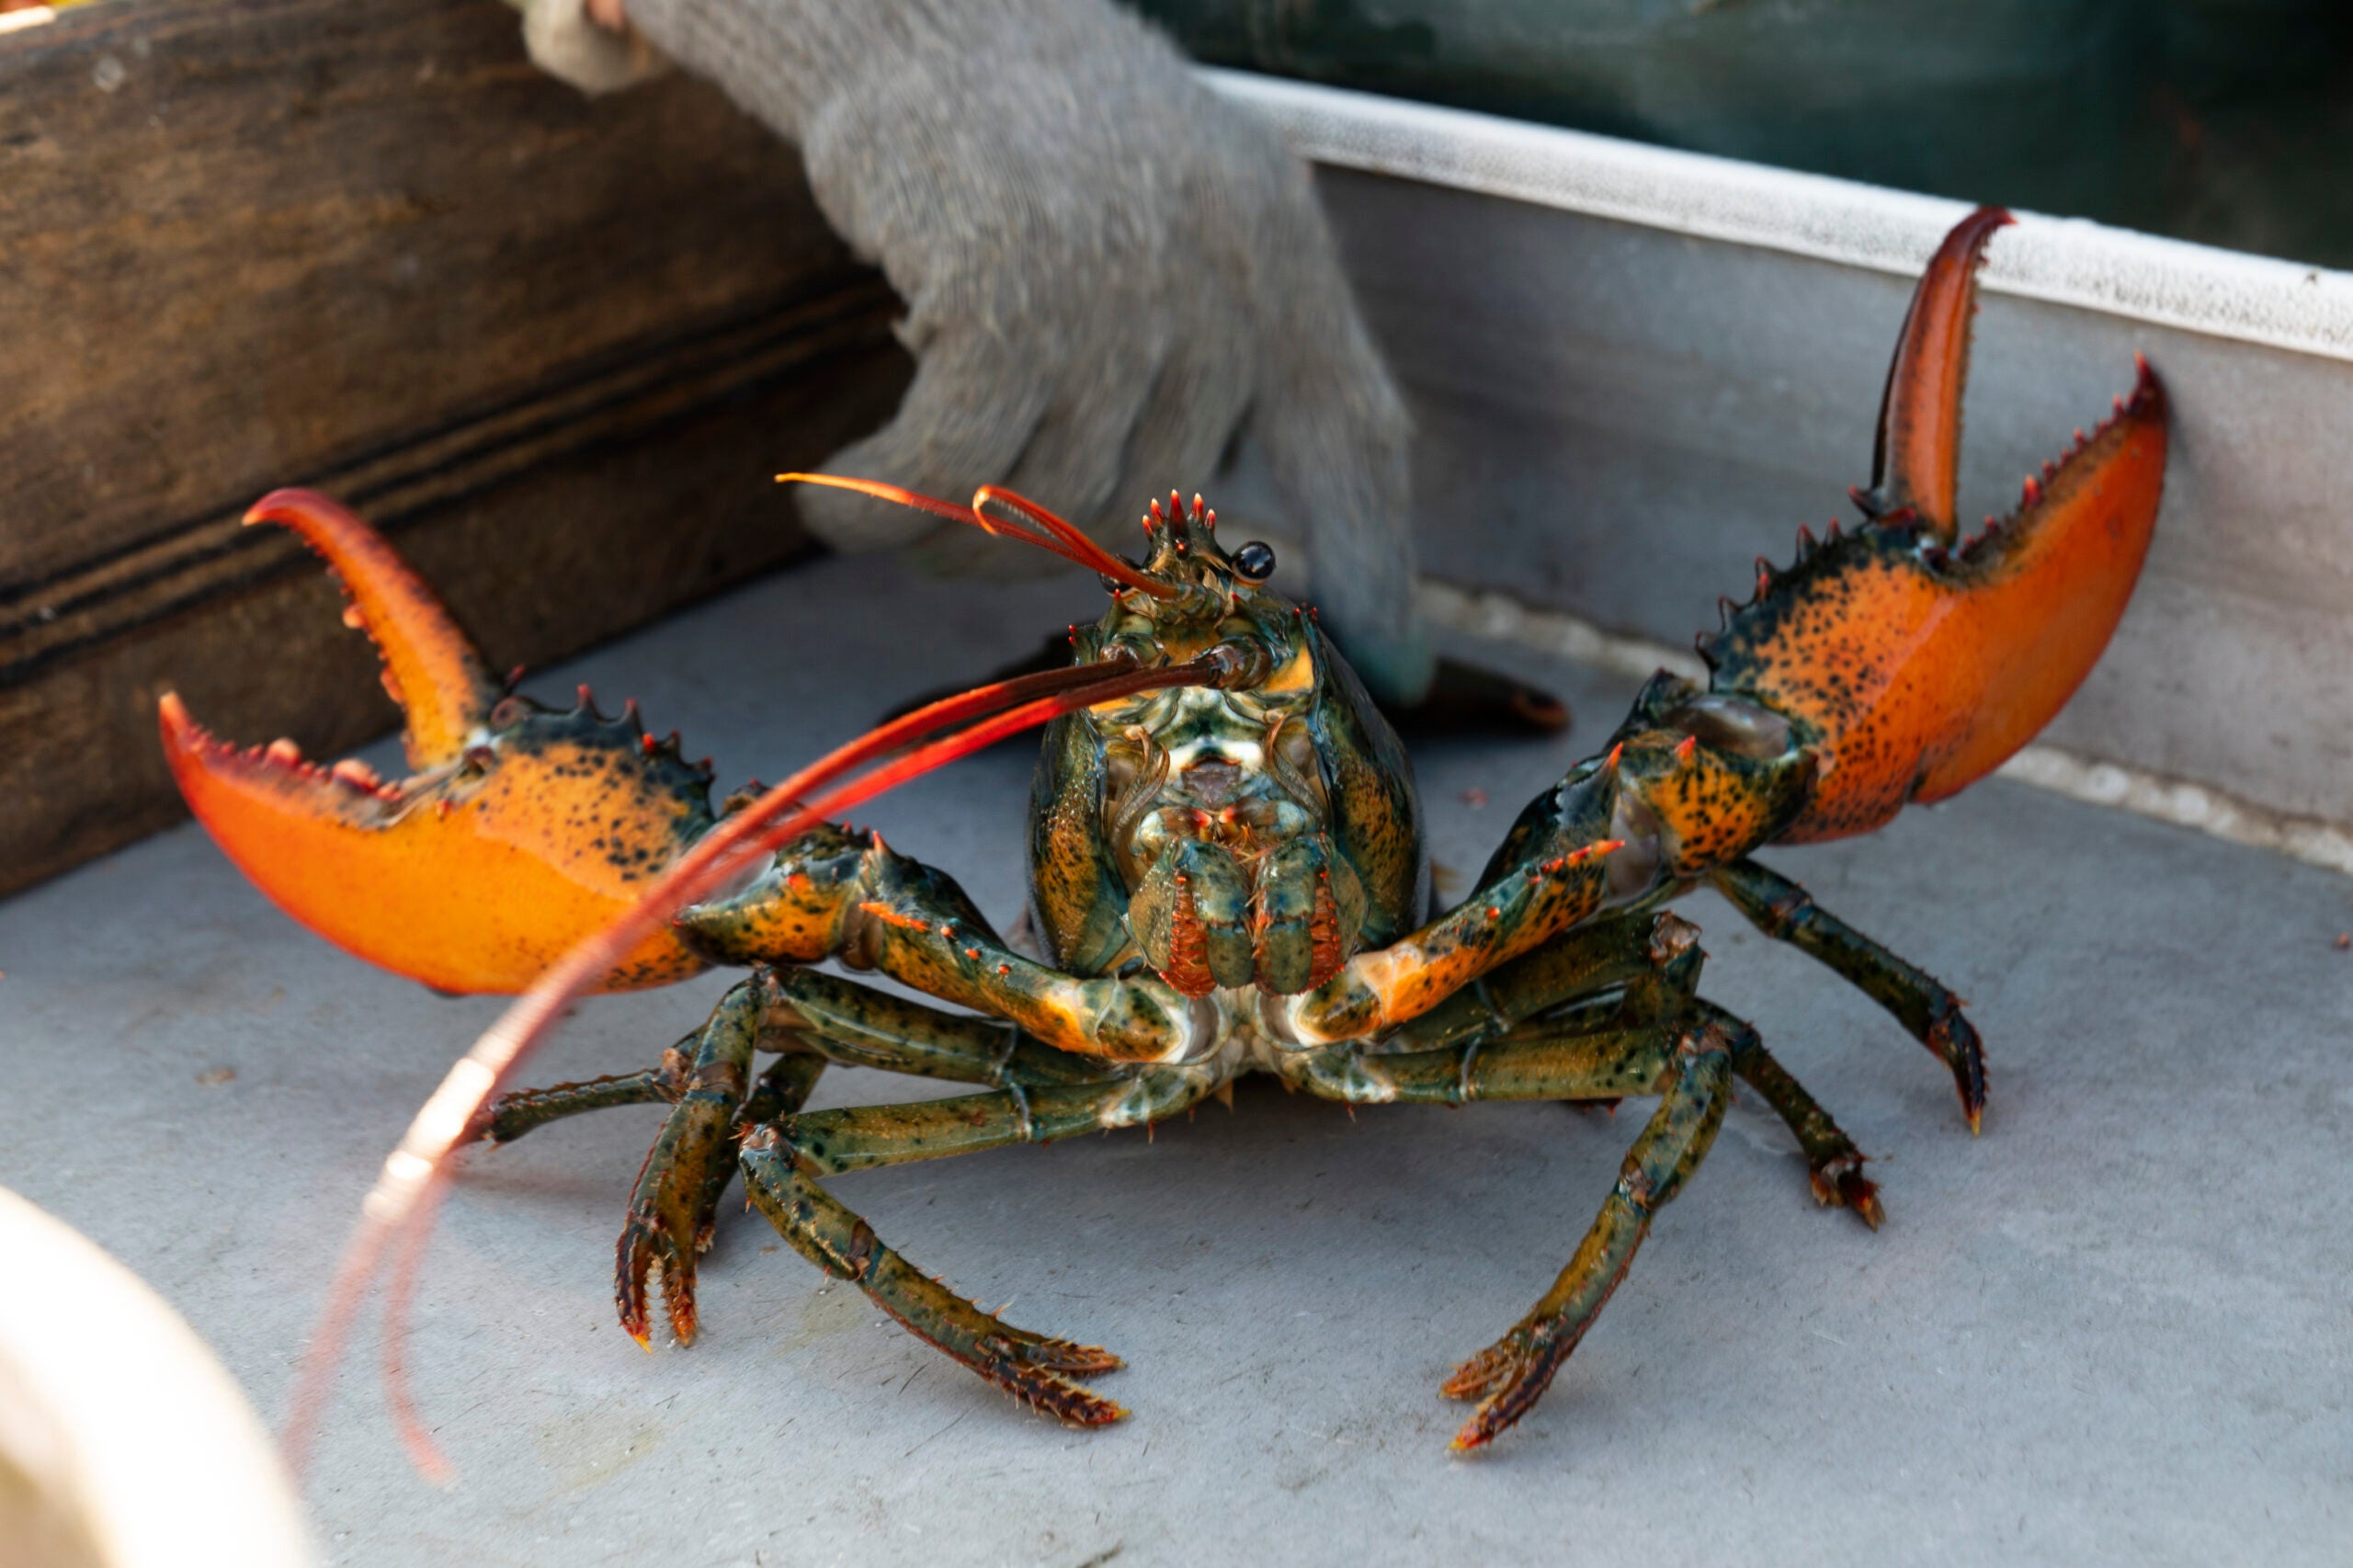 Young lobsters show decline off New England, and fishermen will